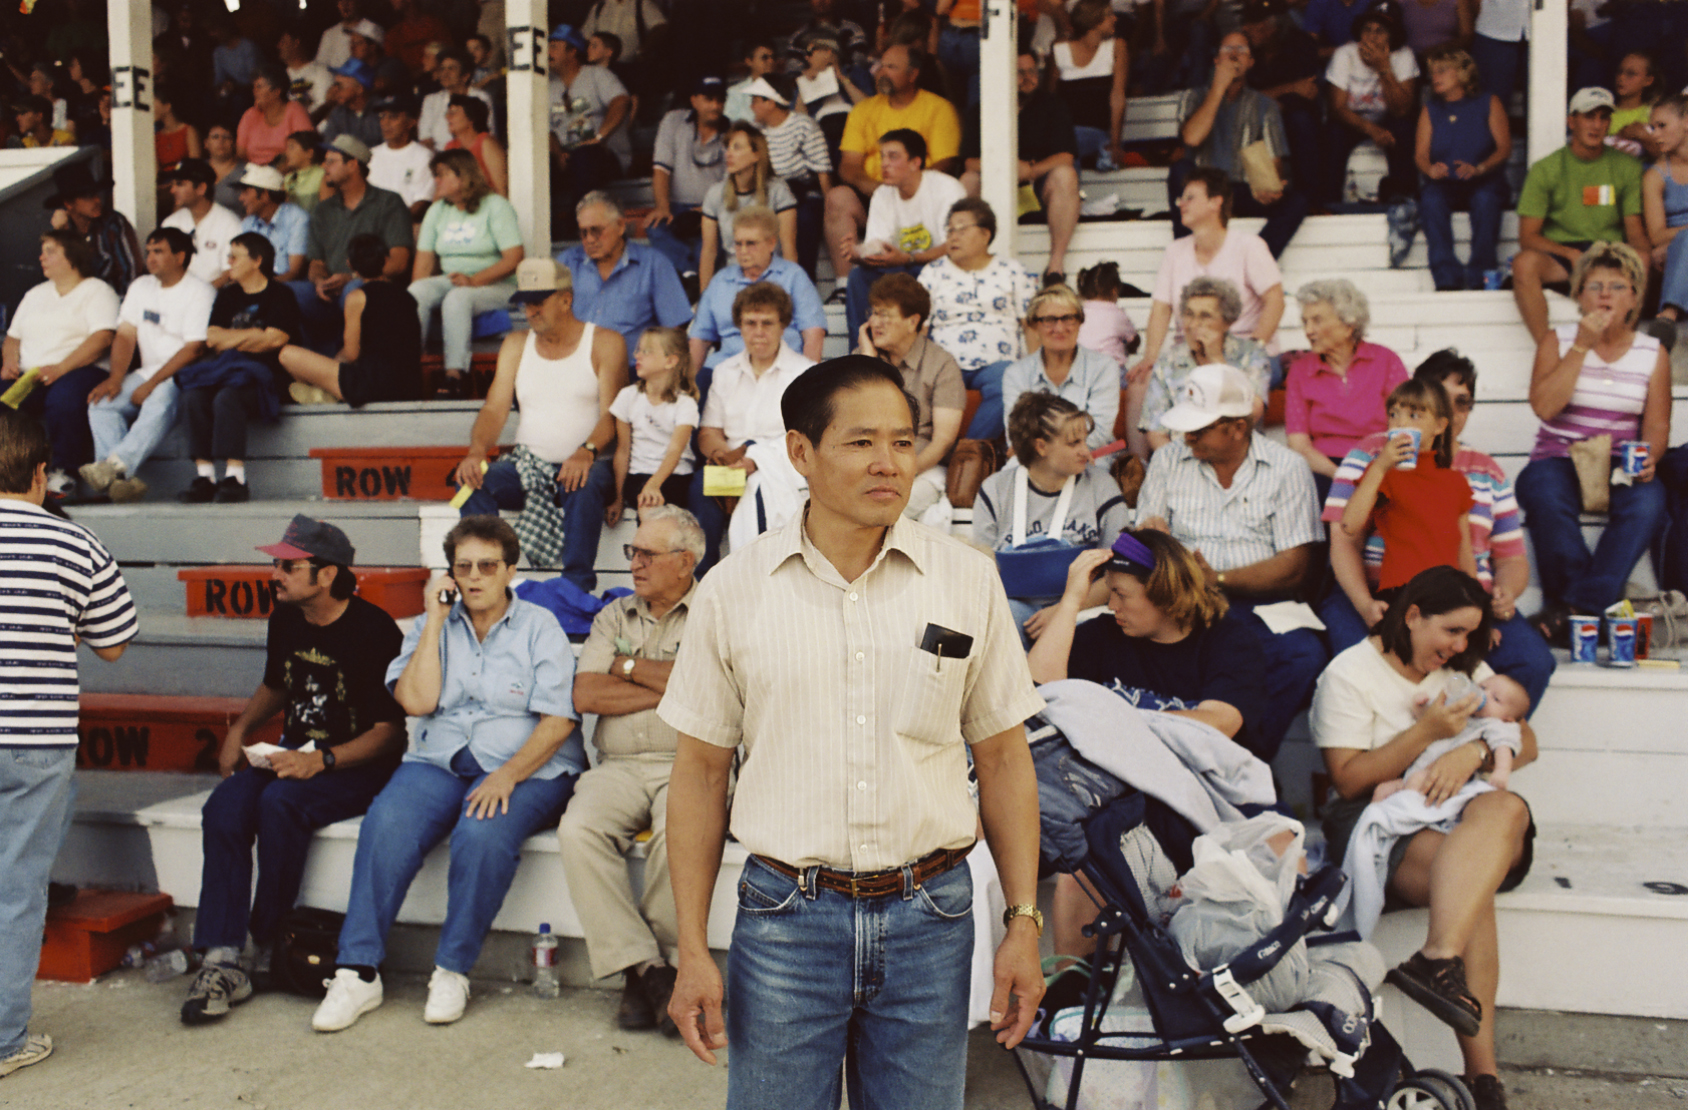 Color photograph of an East Asian man in a short-sleeved dress shirt and jeans, standing in front of a mostly seated crowd of predominantly white people.